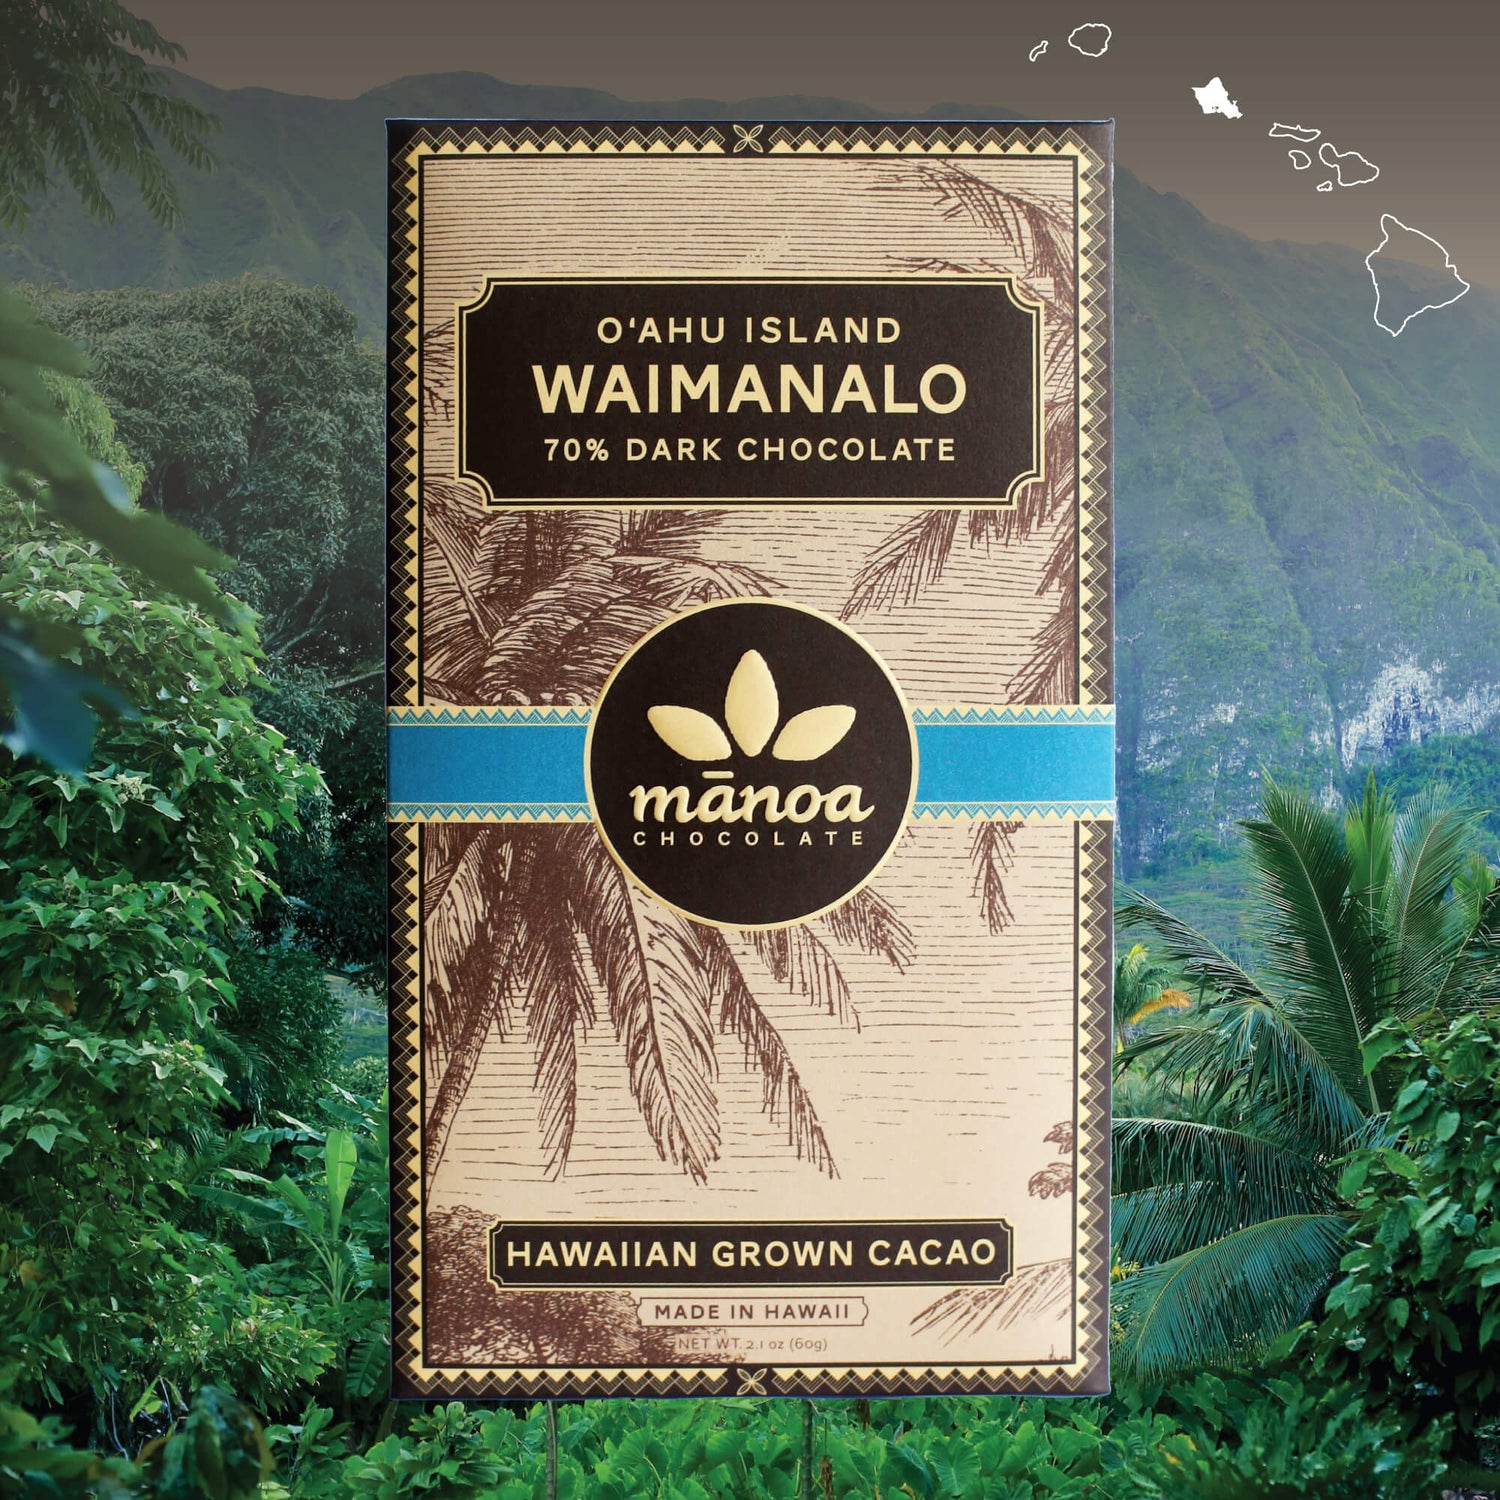 Image of Waimanalo chocolate bar in brown, natural-looking packaging, over tropical forest background